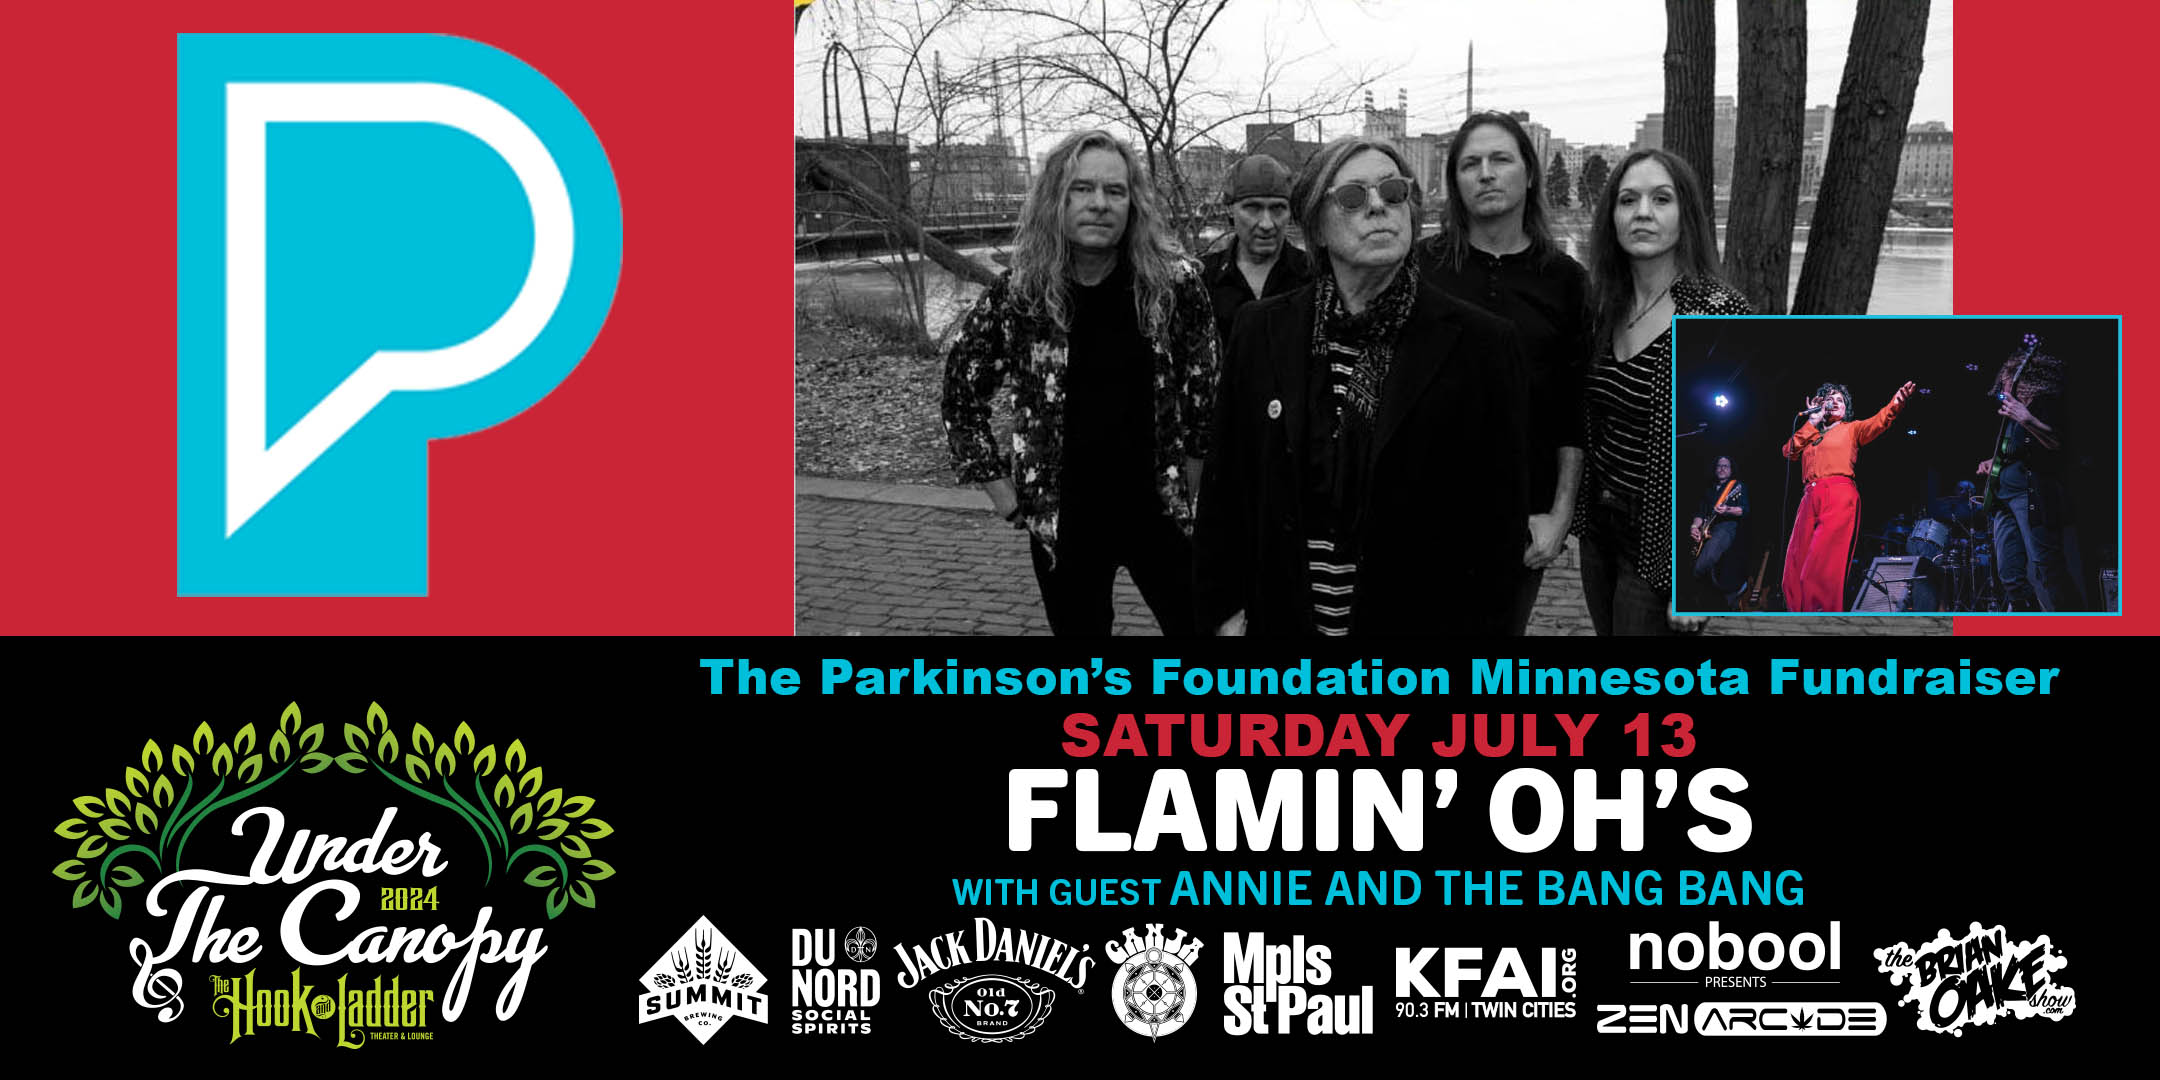 The Flamin’ Oh’s with guest Annie and the Bang Bang The Parkinson’s Foundation Minnesota Fundraiser Saturday, July 13 Under The Canopy at The Hook and Ladder Theater "An Urban Outdoor Summer Concert Series" Doors 6:00pm :: Music 7:00pm :: 21+ GA: $25 ADV / $35 DOS